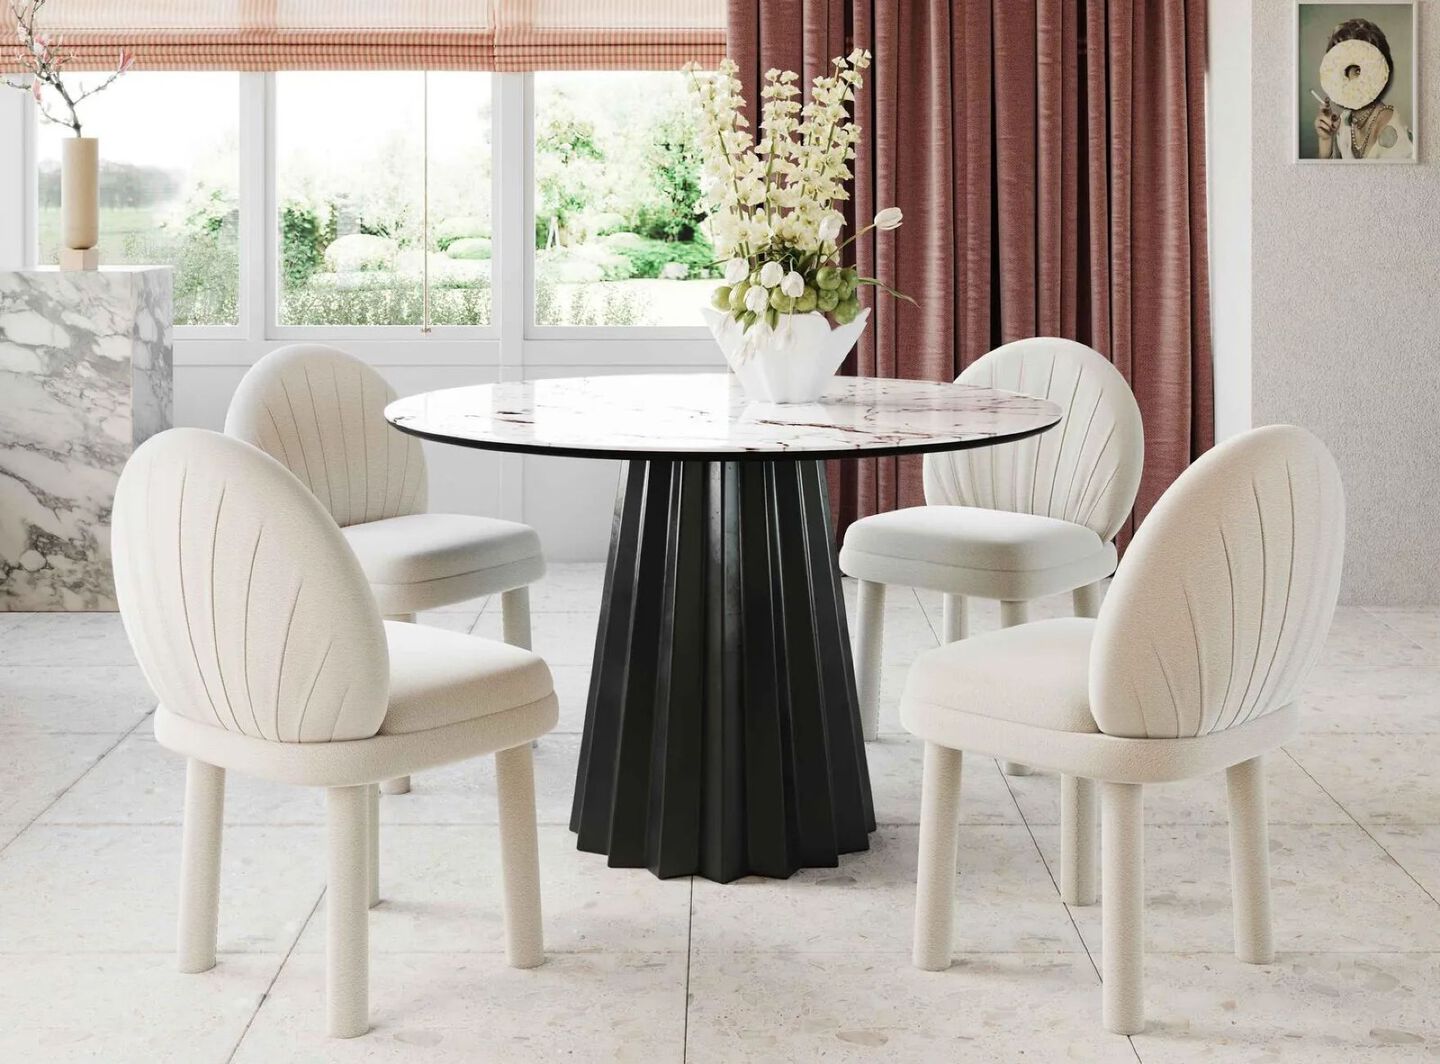 Black stone round dining table surrounded by white plush chairs